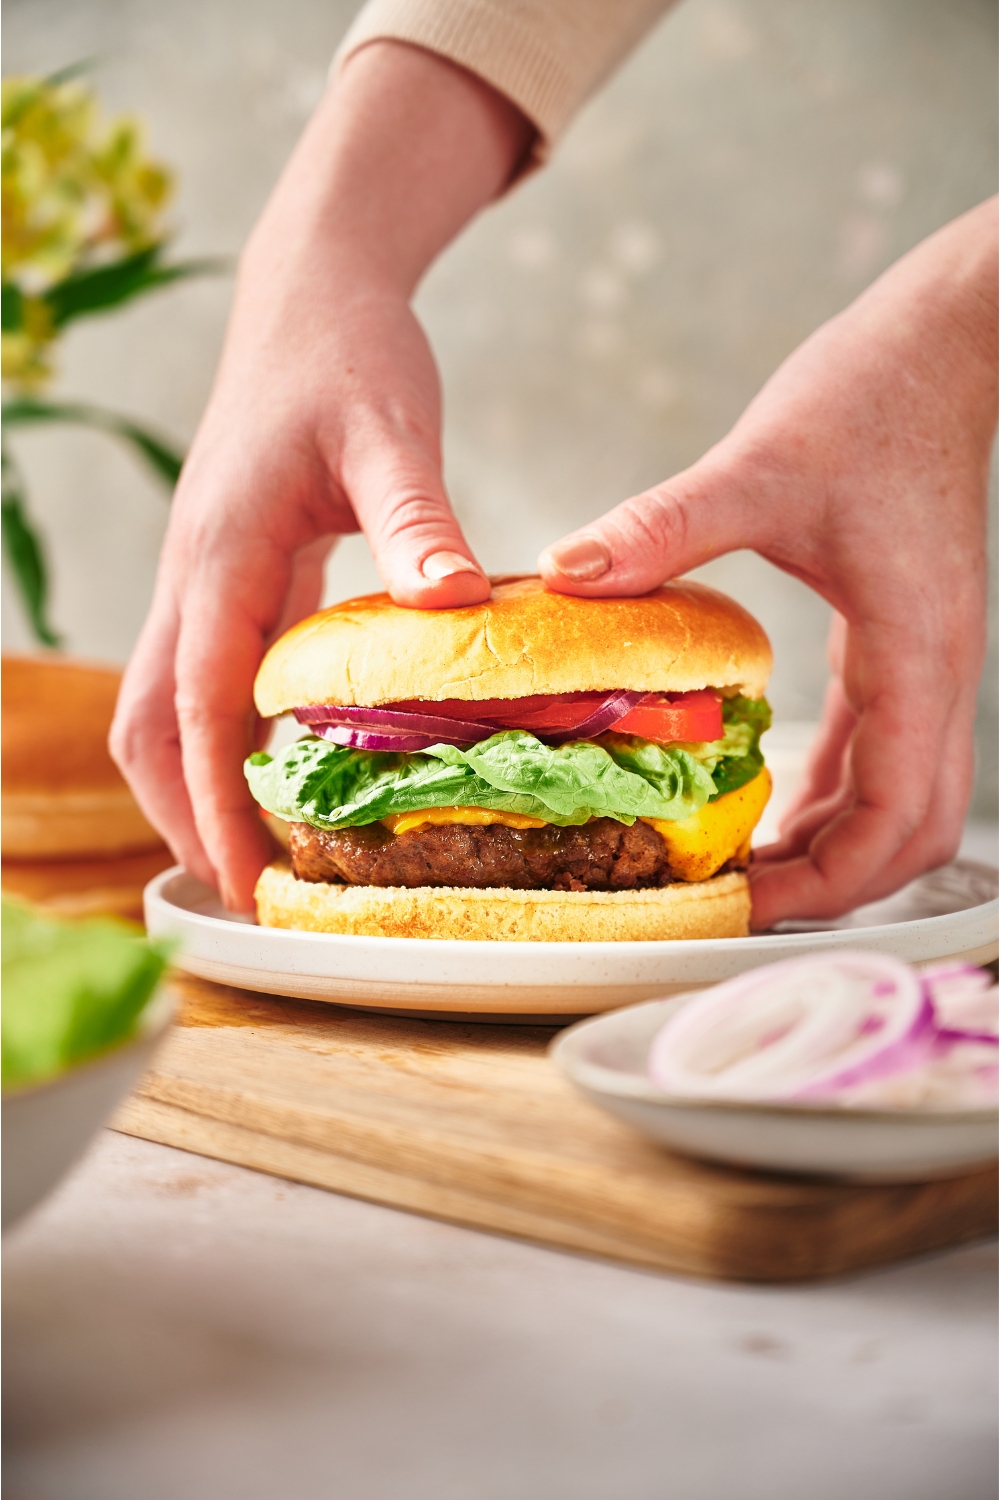 A hand grabbing a cheeseburger from a white plate. The burger has lettuce, red onion, sliced tomato, and cheese on it.